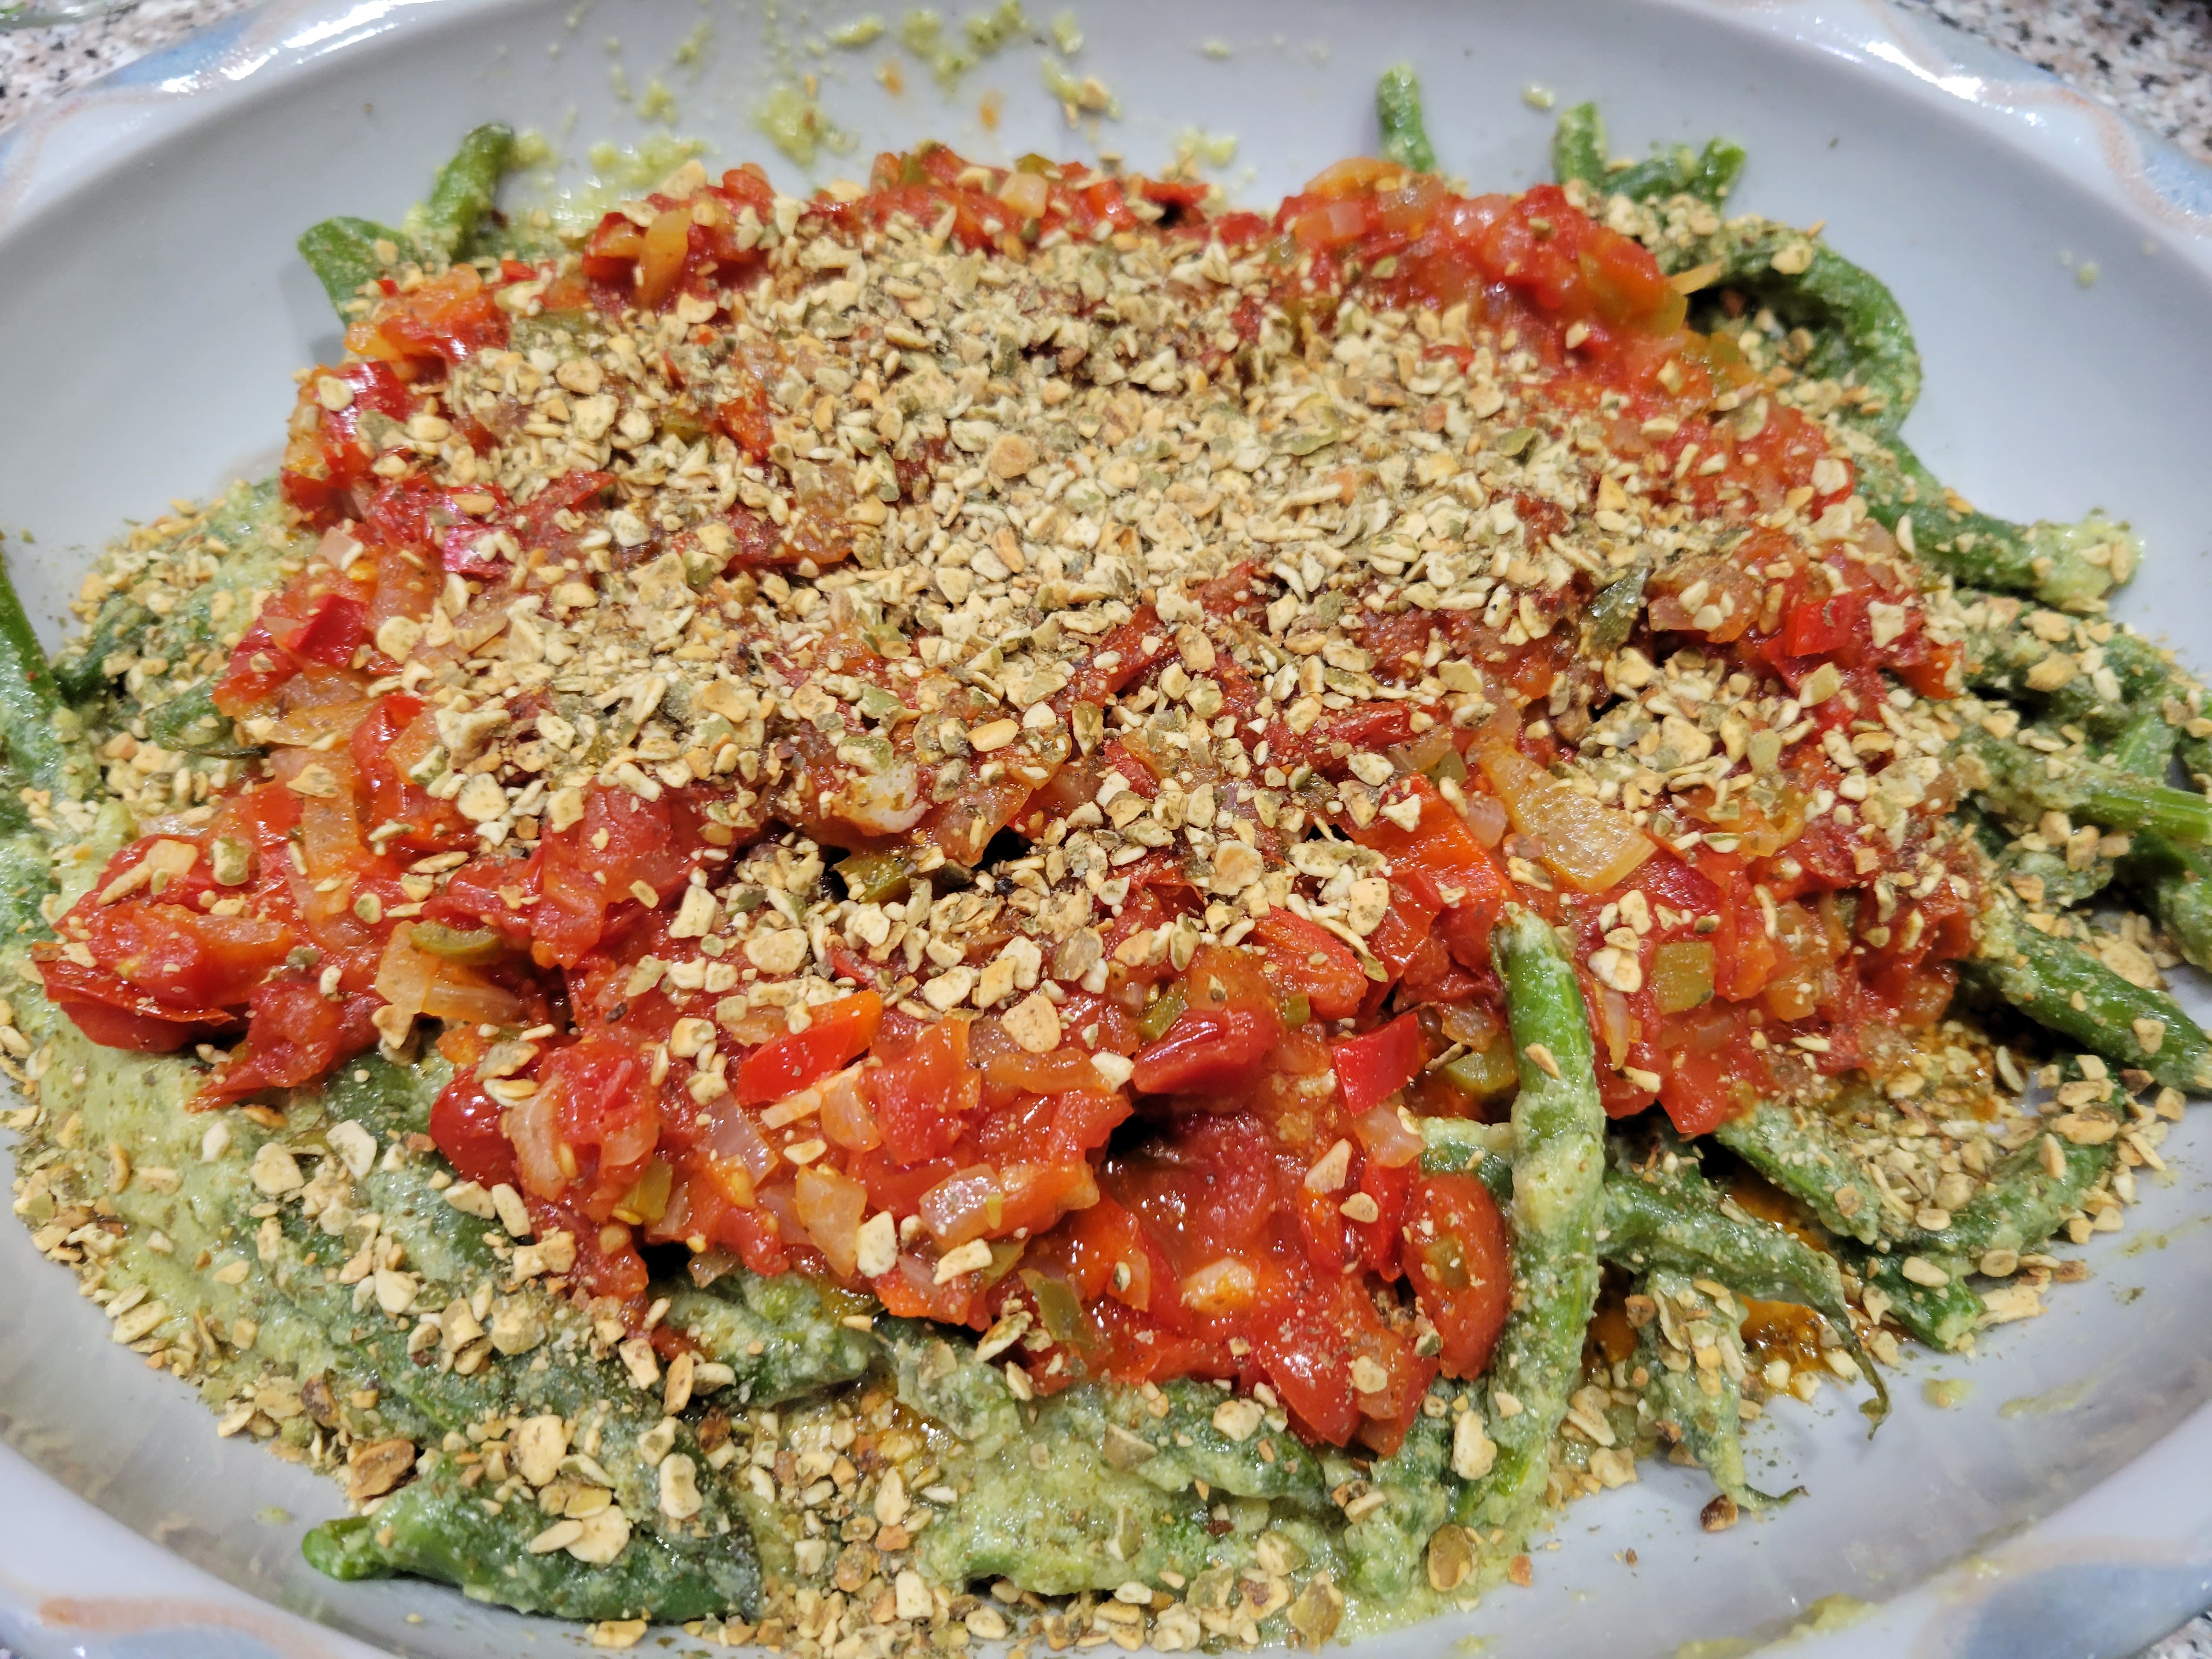 platter of green beans in corn sauce.  They're topped with a homemade tomato salsa and sprinkled with ground pumpkin seeds